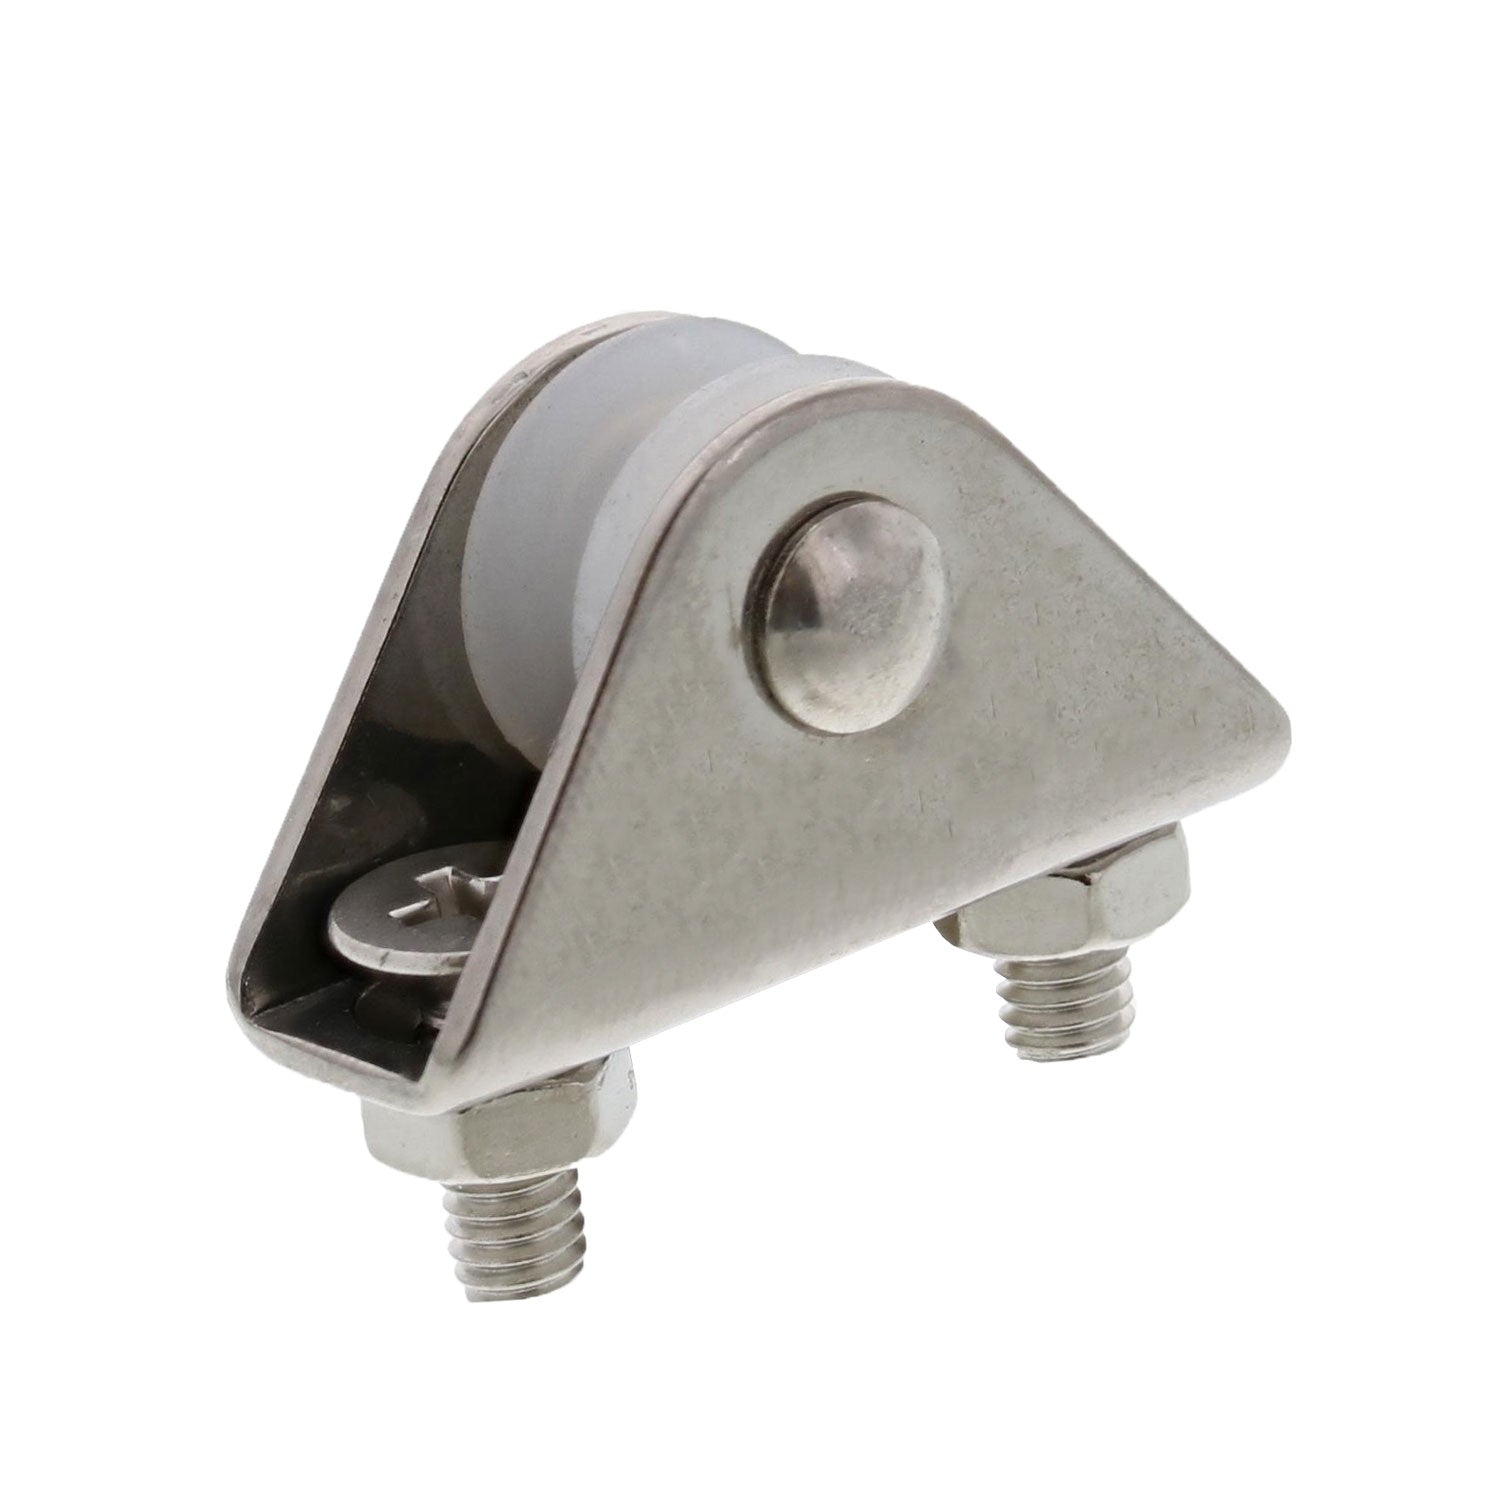 Stainless Deck Mount Rope Roller Block